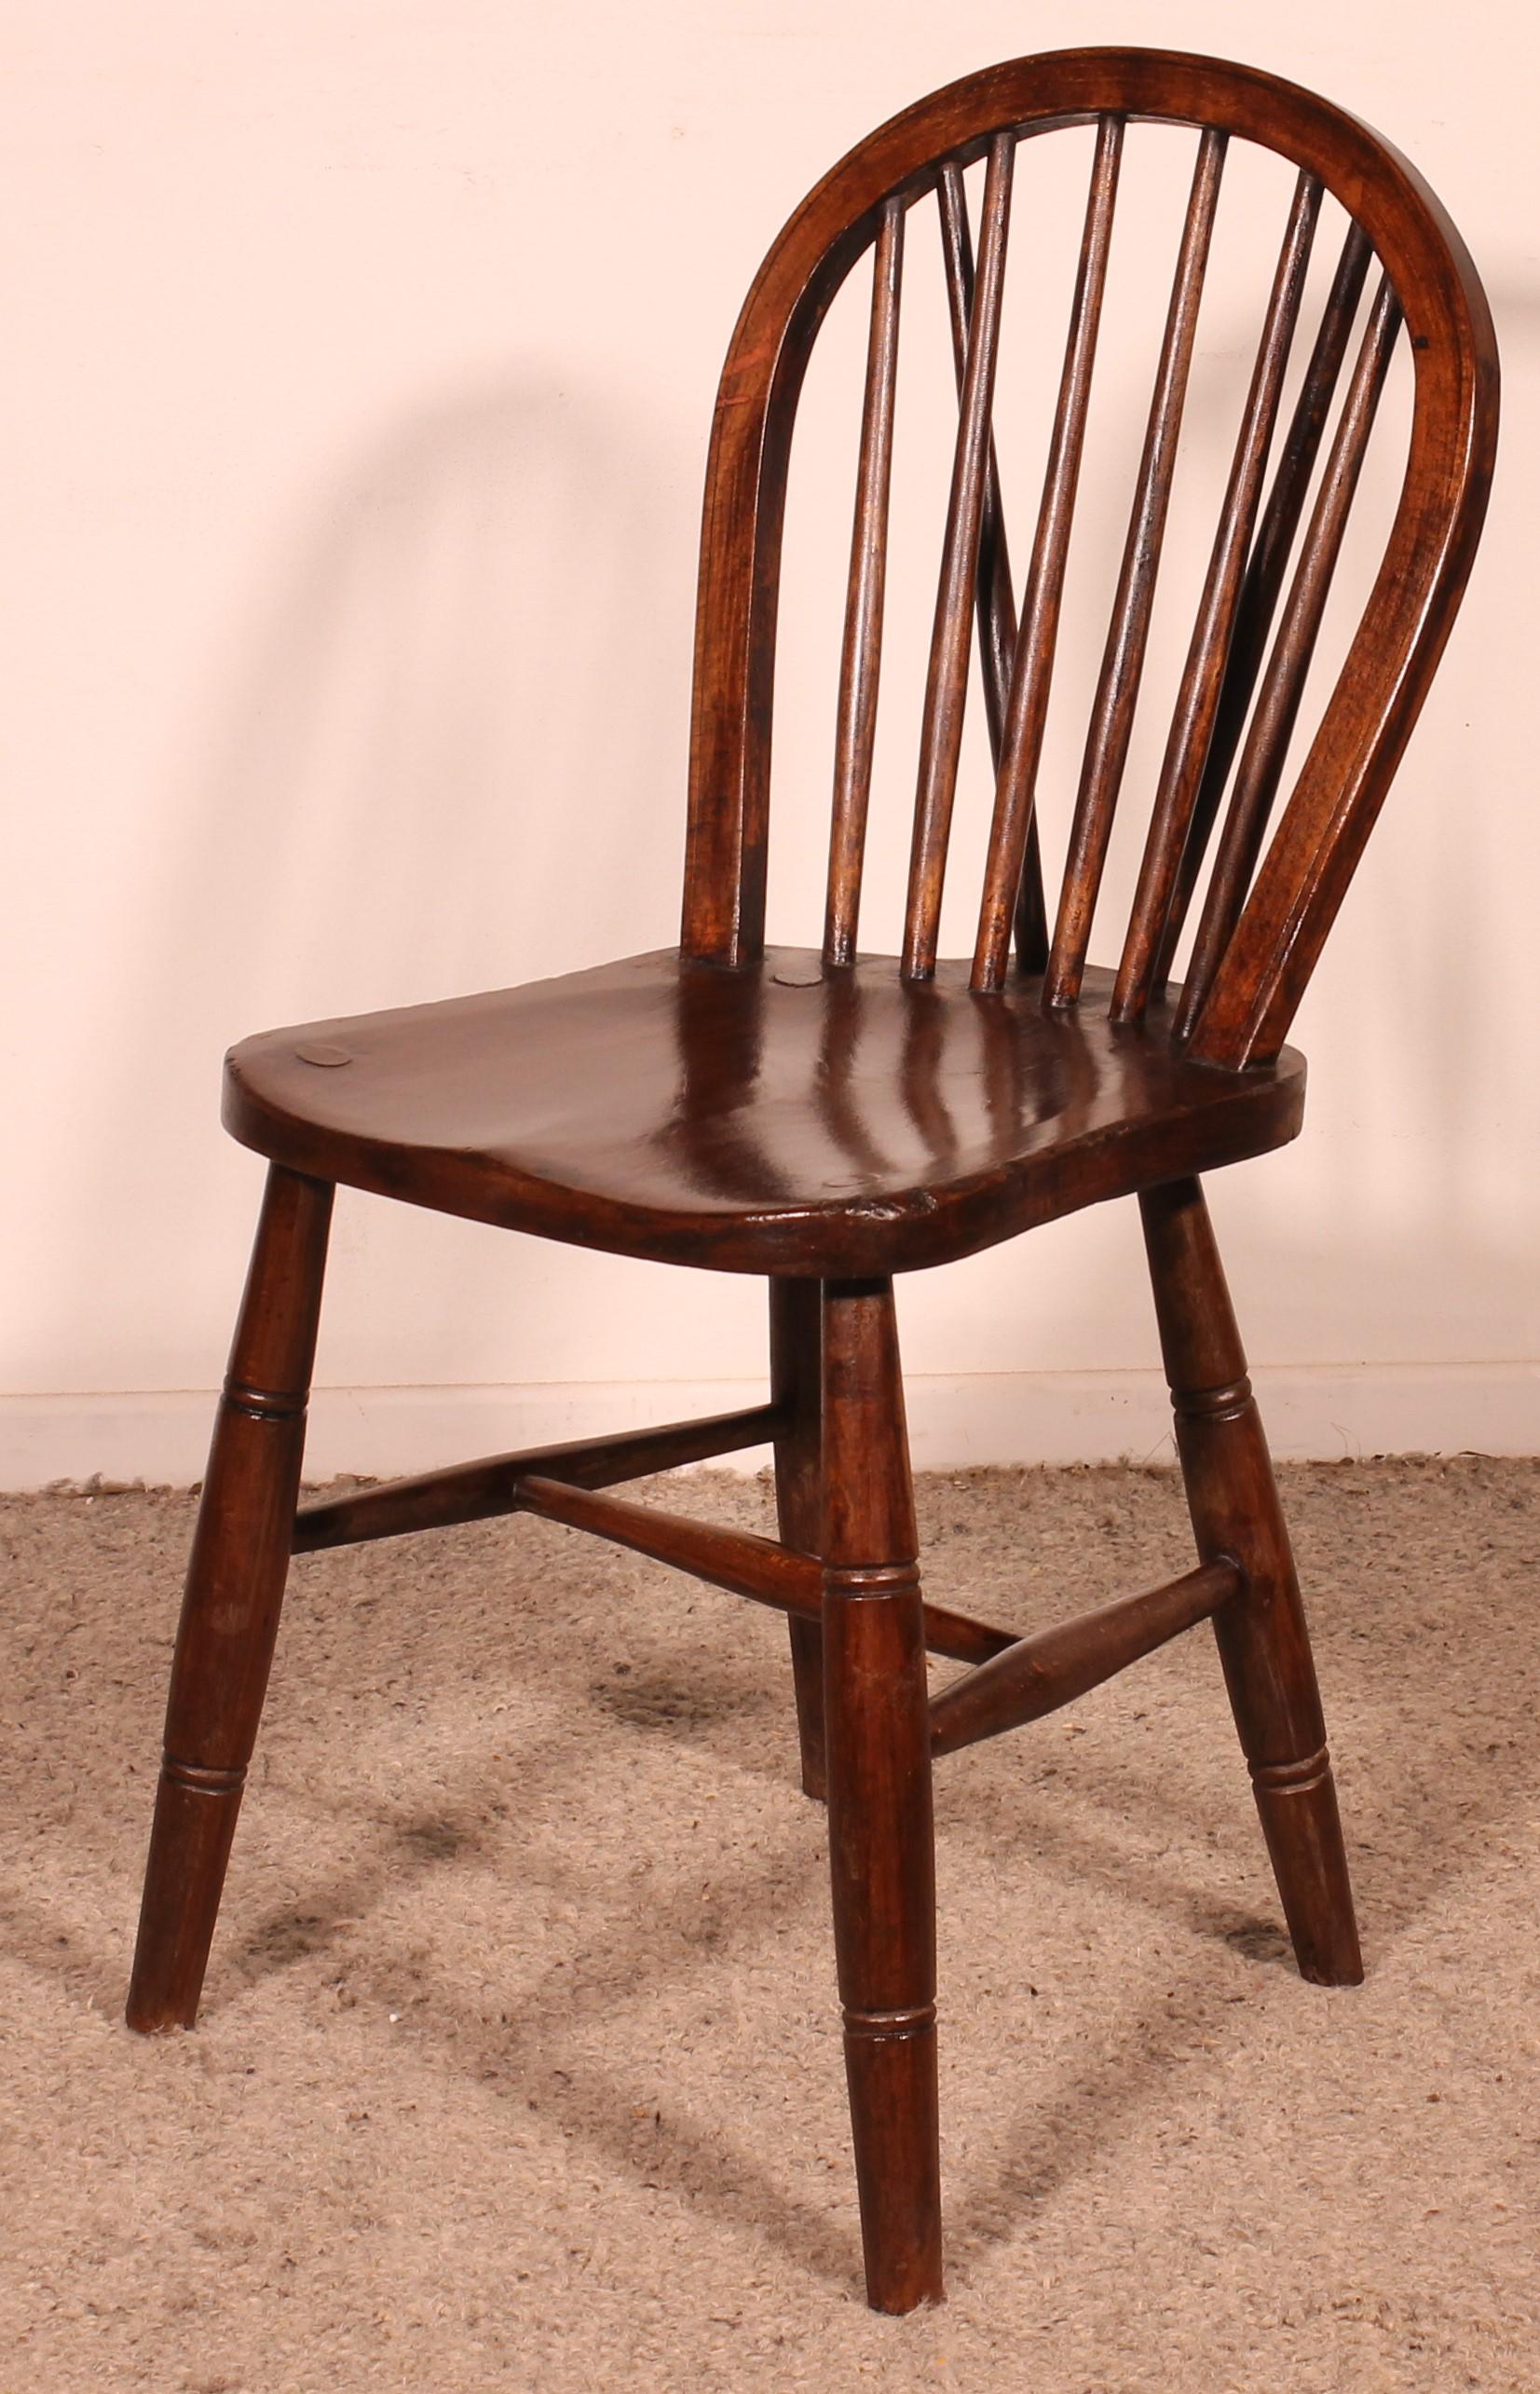 British Set Of 4 Windsor Chairs From The 19th Century For Sale